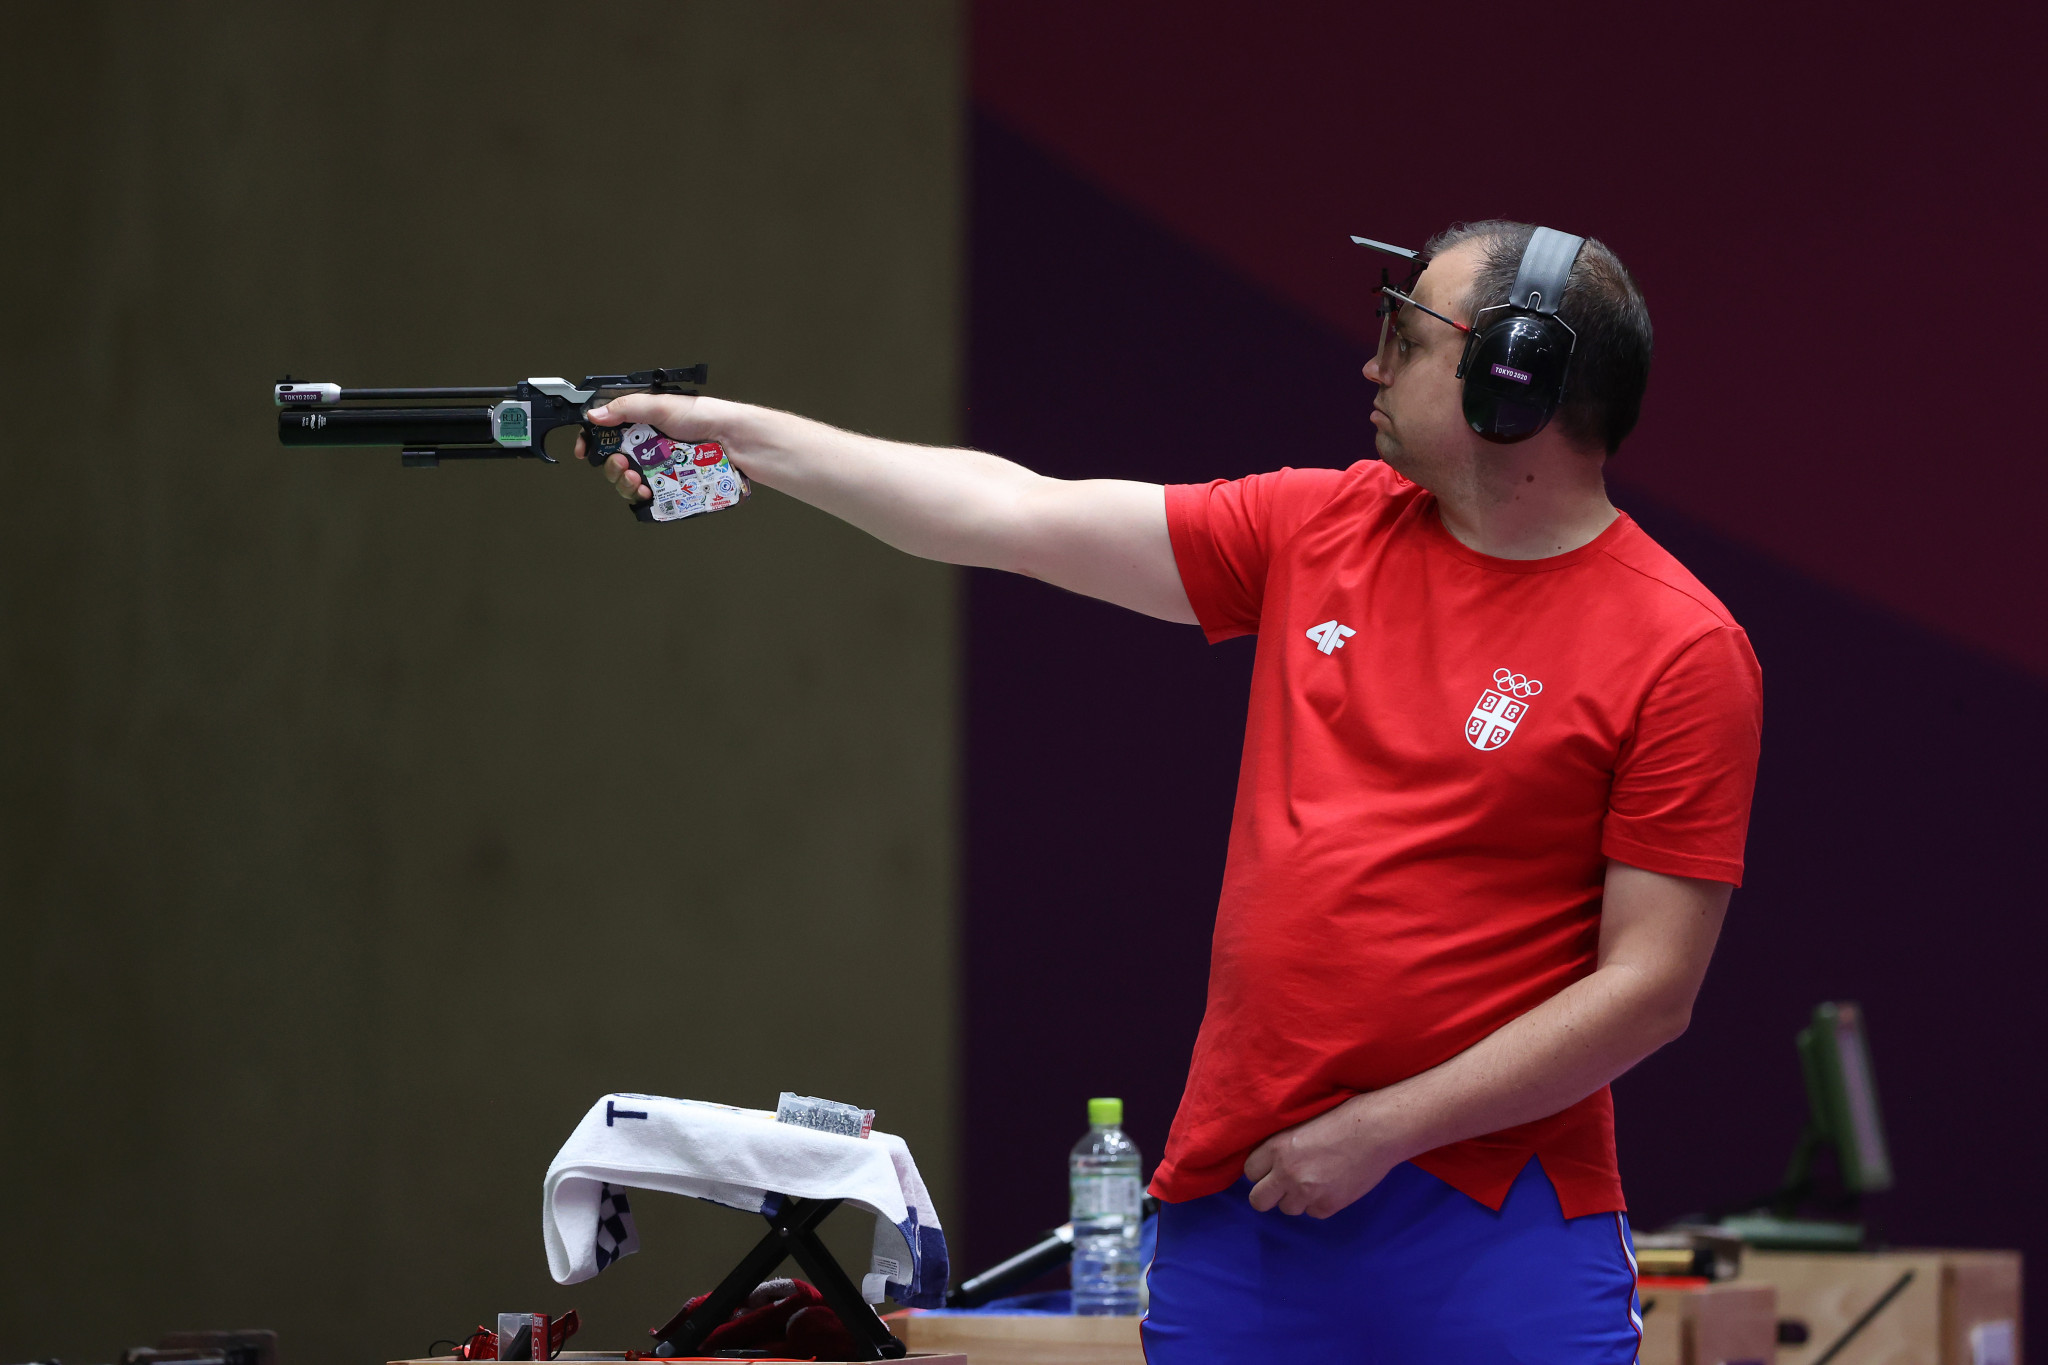 Olympic silver medallist Damir Mikec triumphed for Serbia in the men's 10m air pistol at the ISSF World Cup in Changwon ©Getty Images